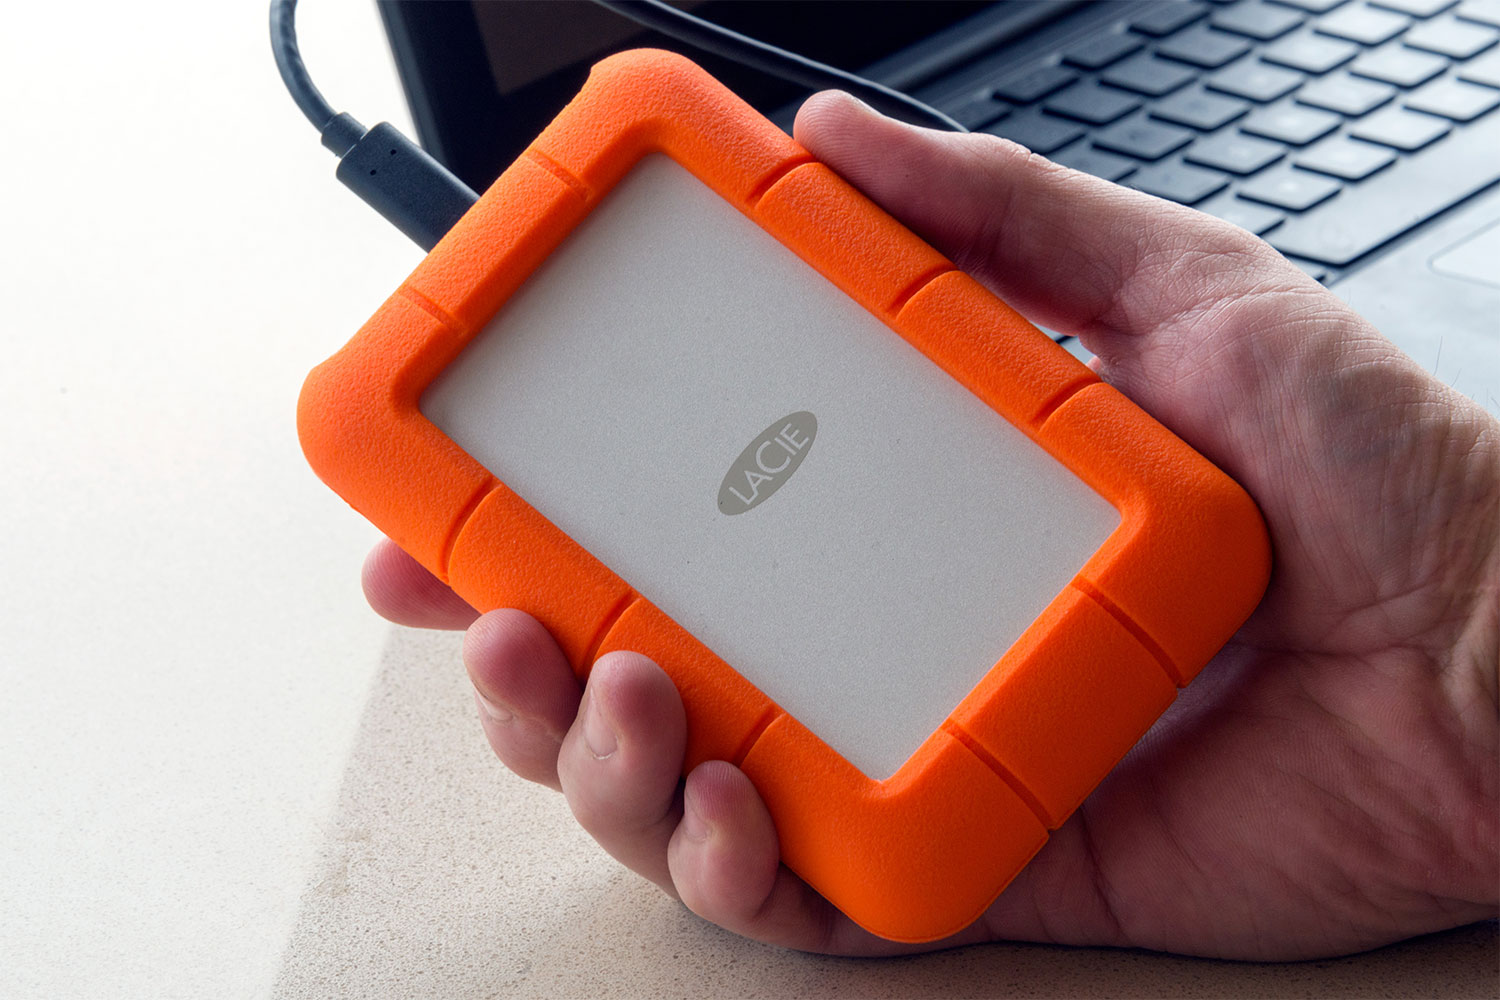 LaCie Rugged Pro Thunderbolt 3 SSD 4 To - Disque dur externe - LDLC